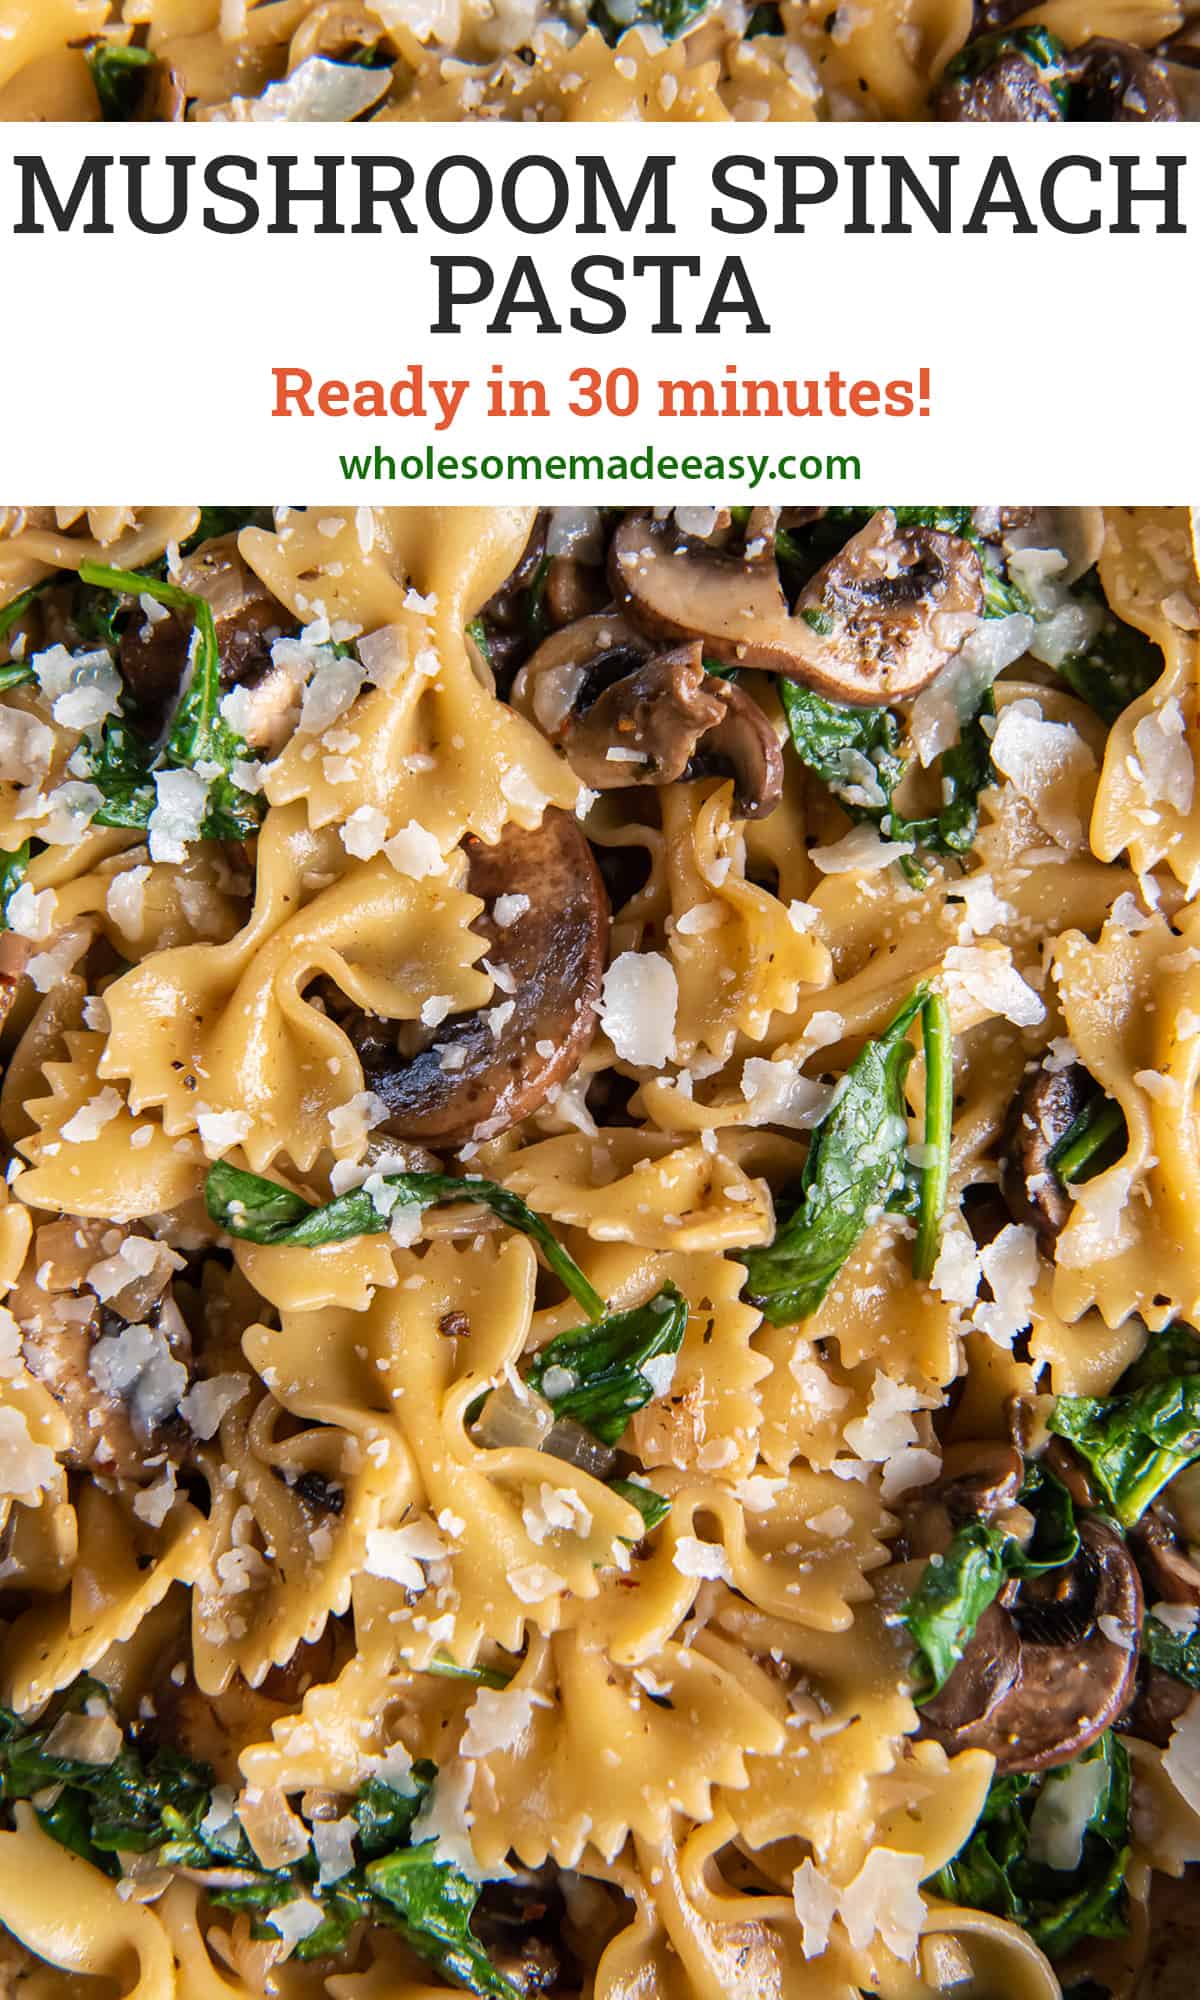 A close up of mushroom pasta with spinach with text.